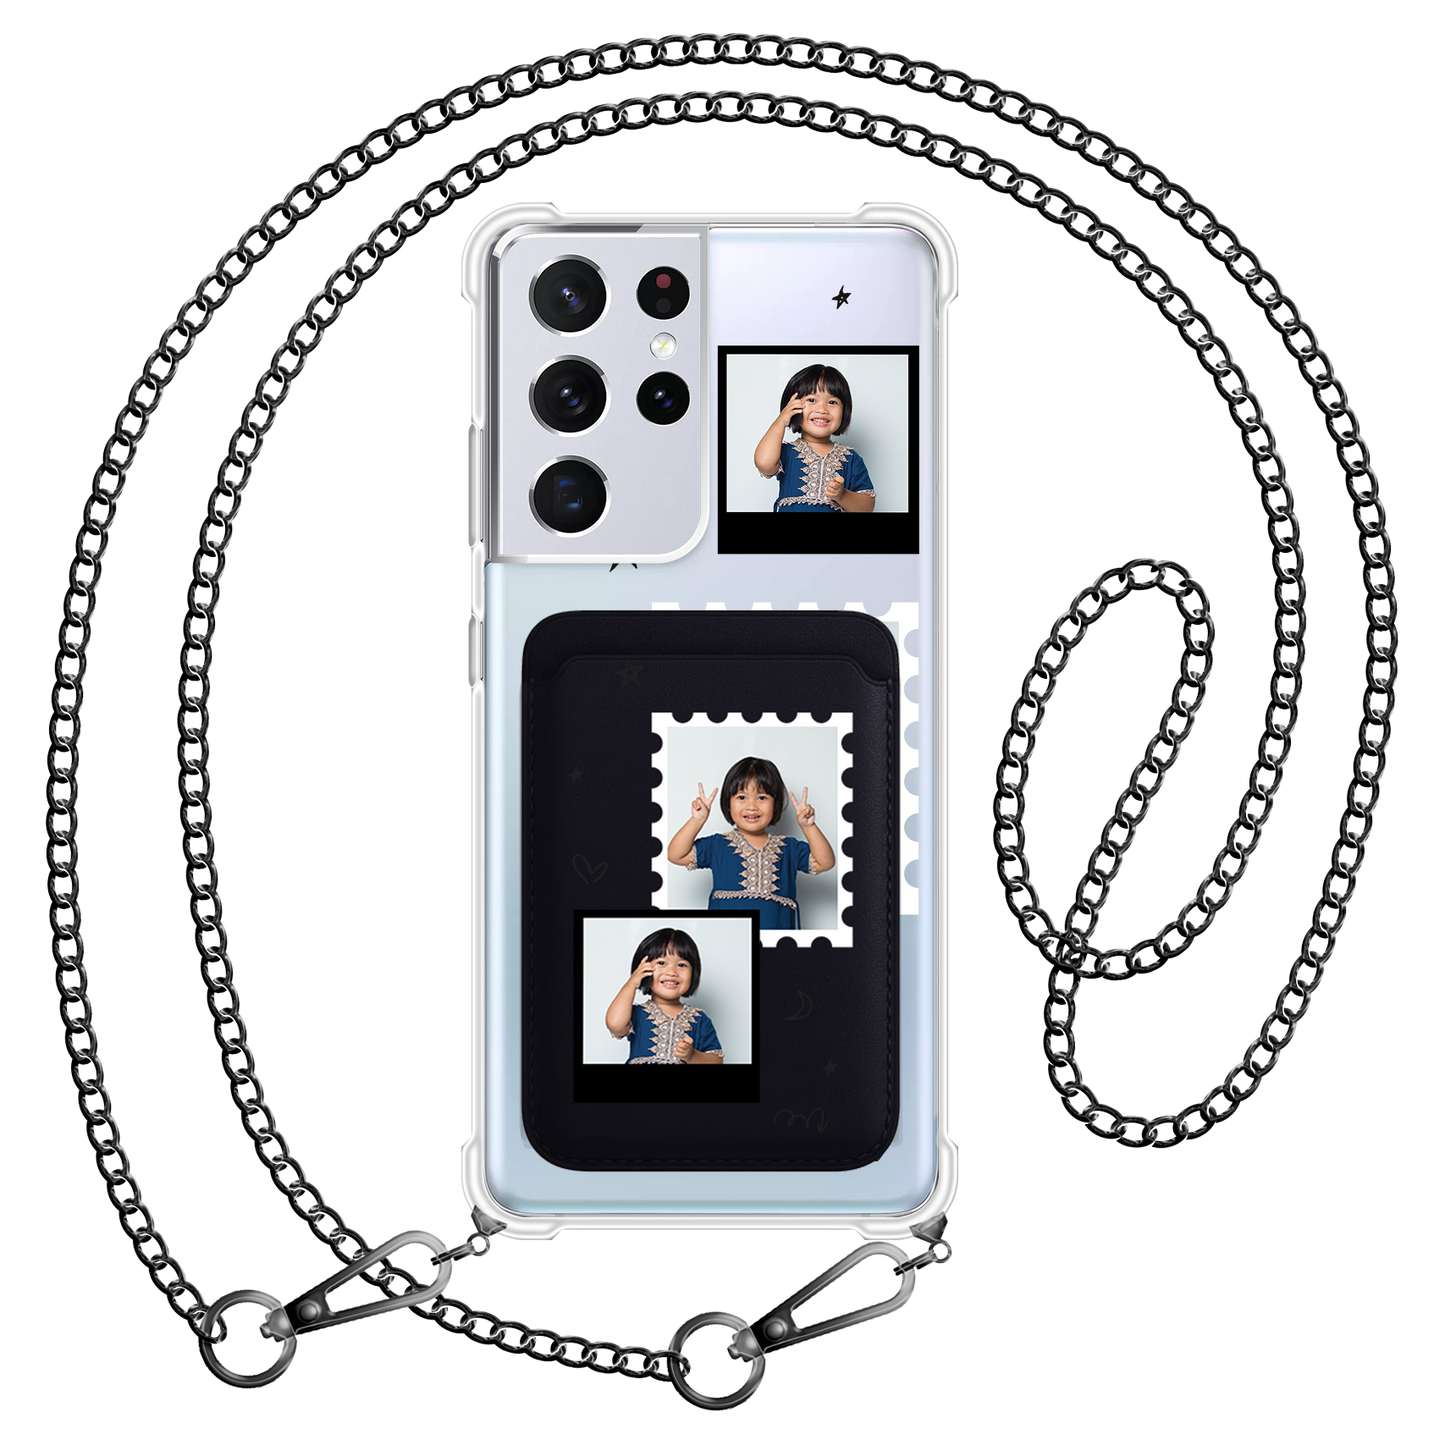 Android Magnetic Wallet Case - Face Grid Black Polaroid